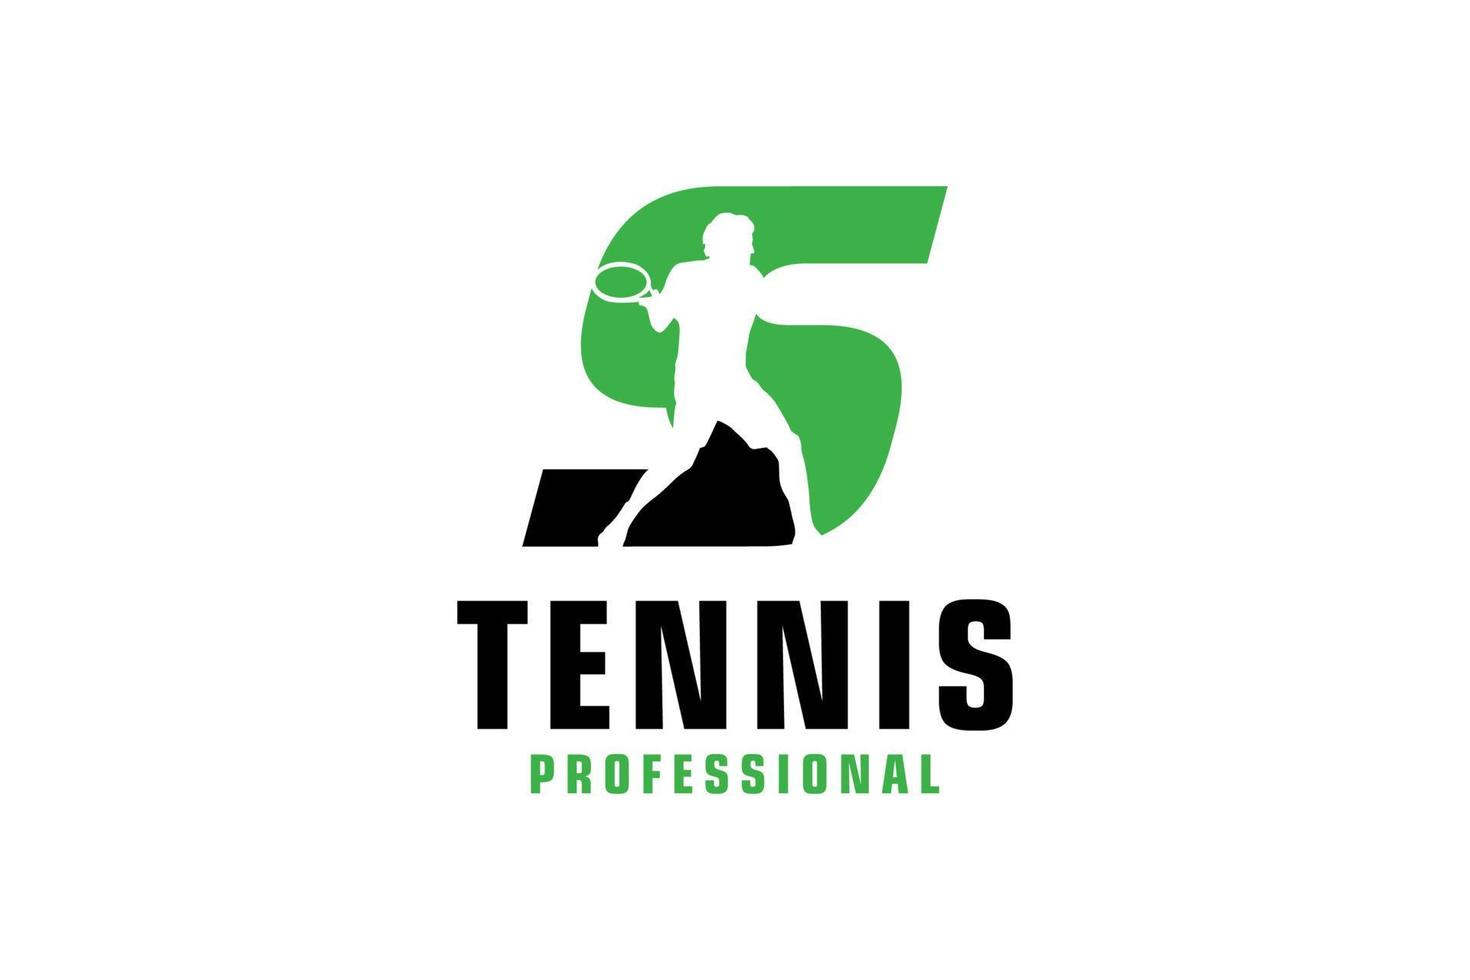 Letter S with Tennis player silhouette Logo Design. Vector Design Template Elements for Sport Team or Corporate Identity.